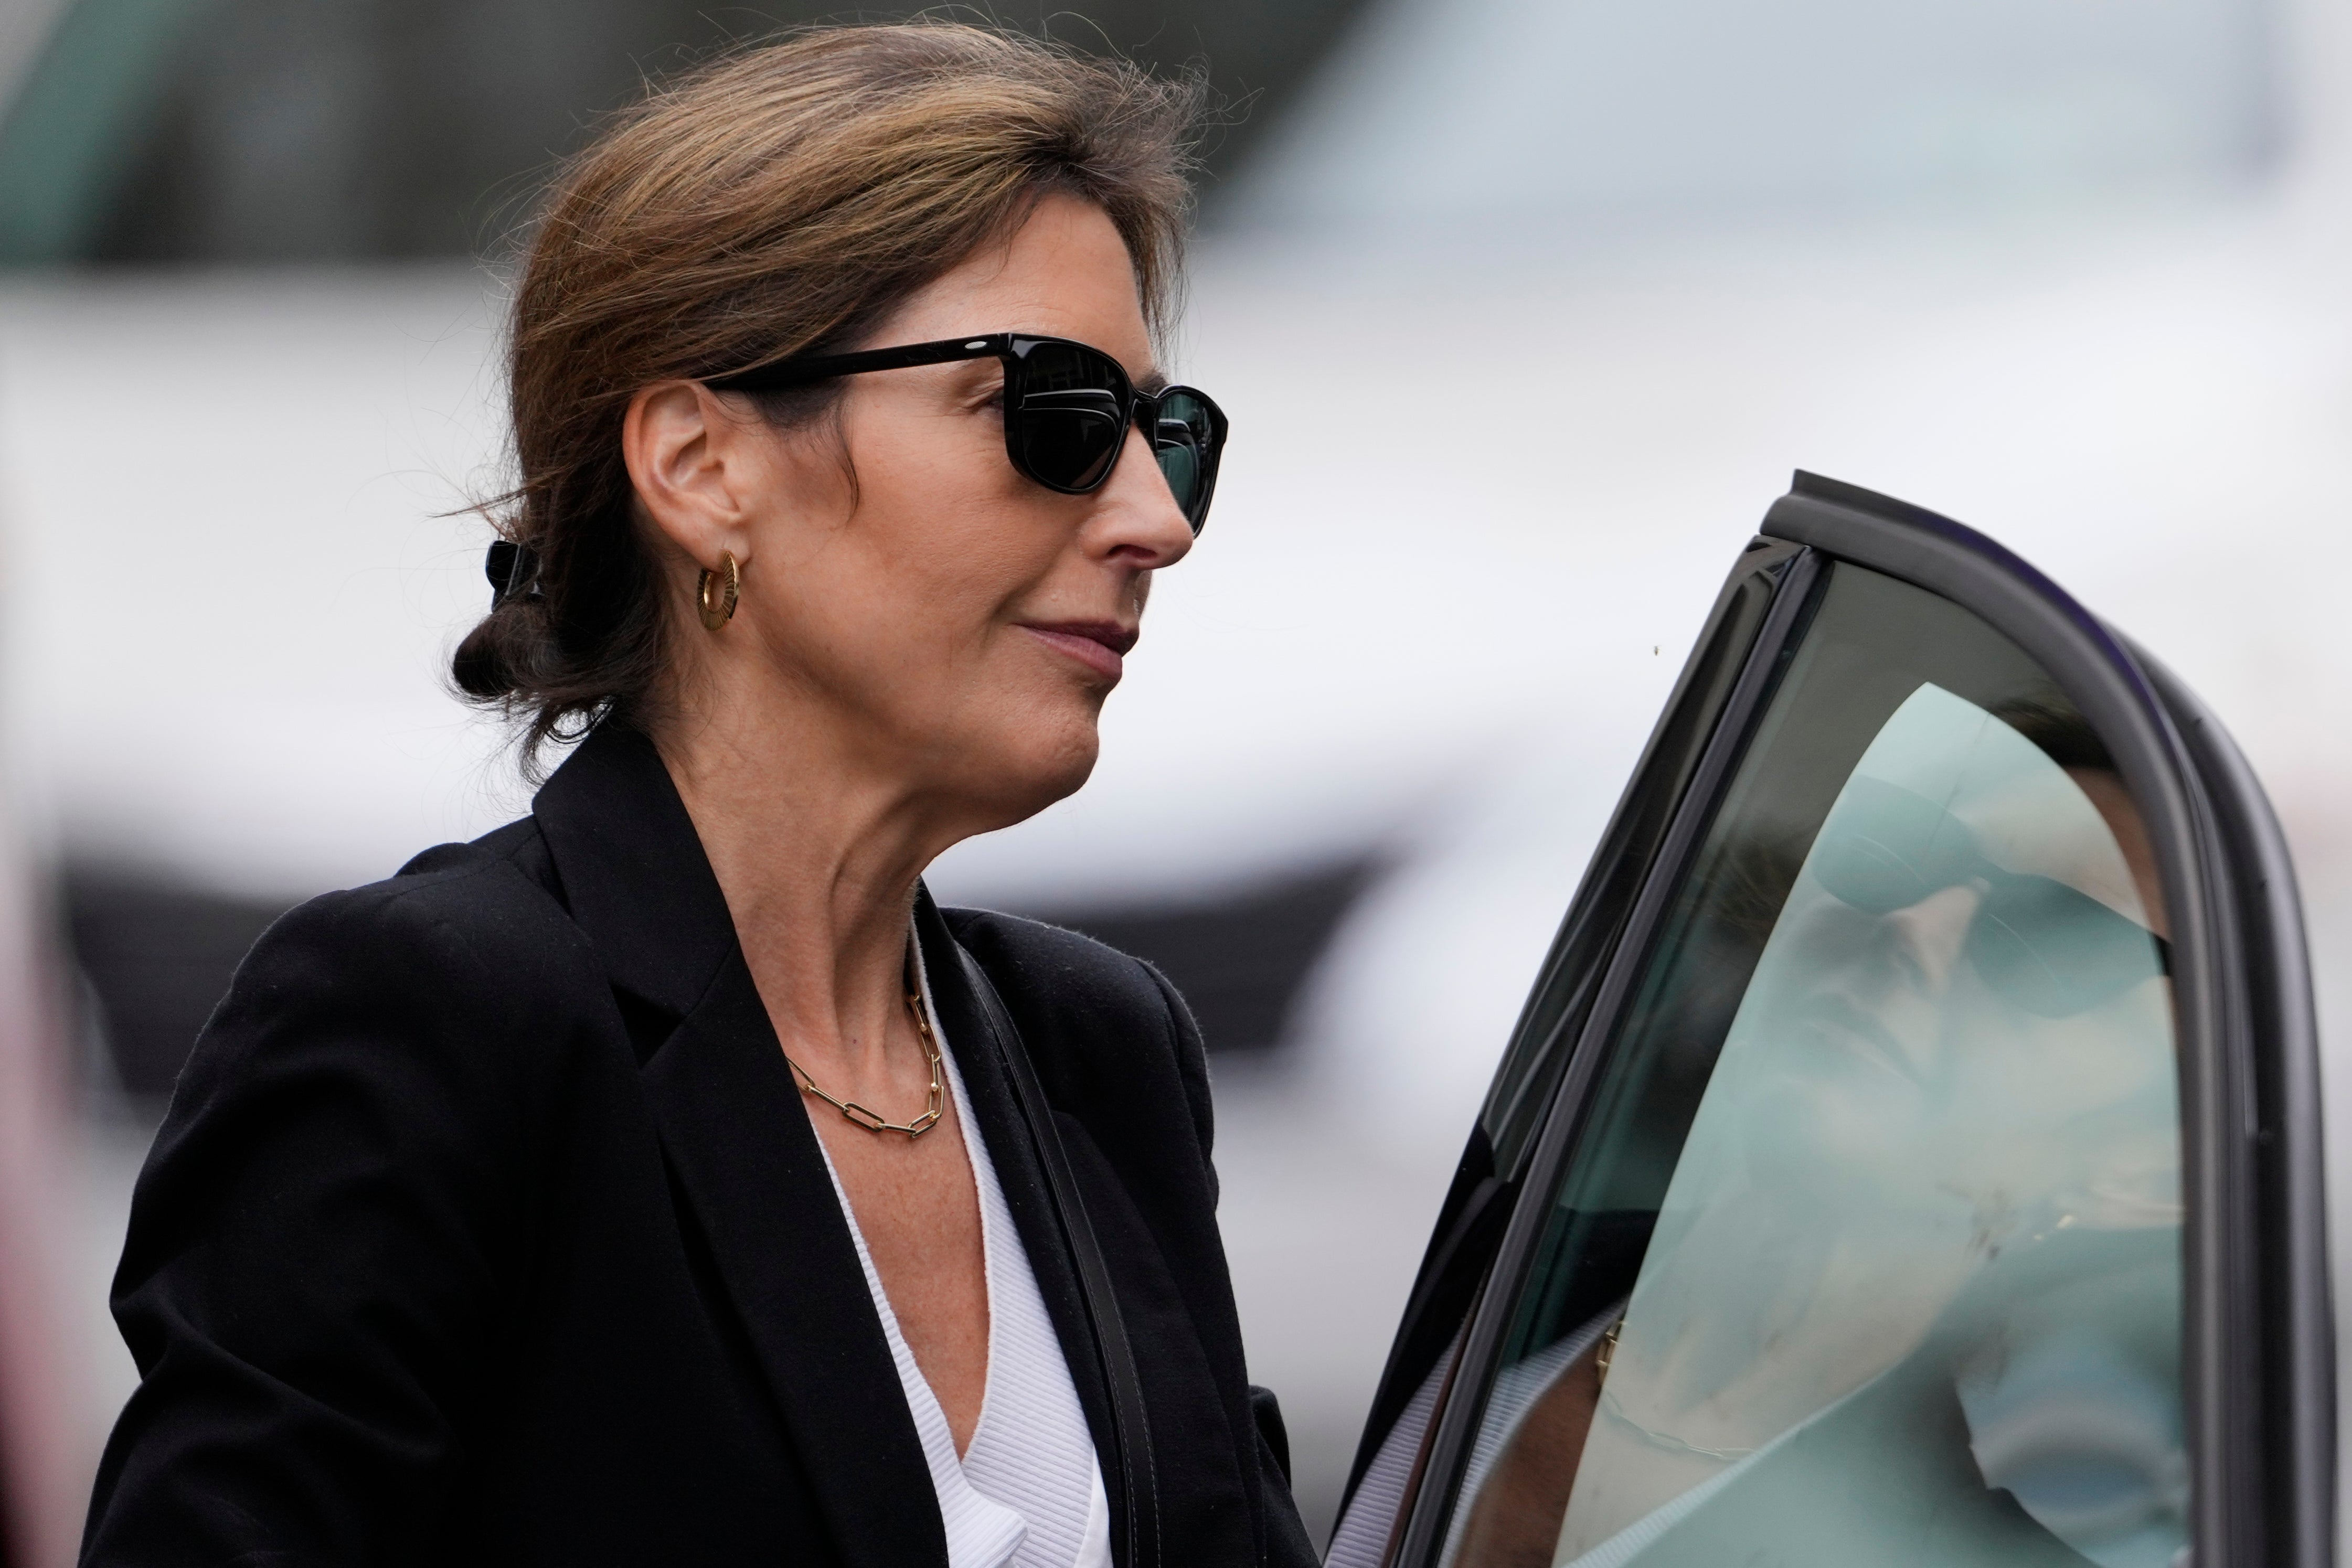 Hallie Biden leaves court on 6 June following her at times explosive testimony